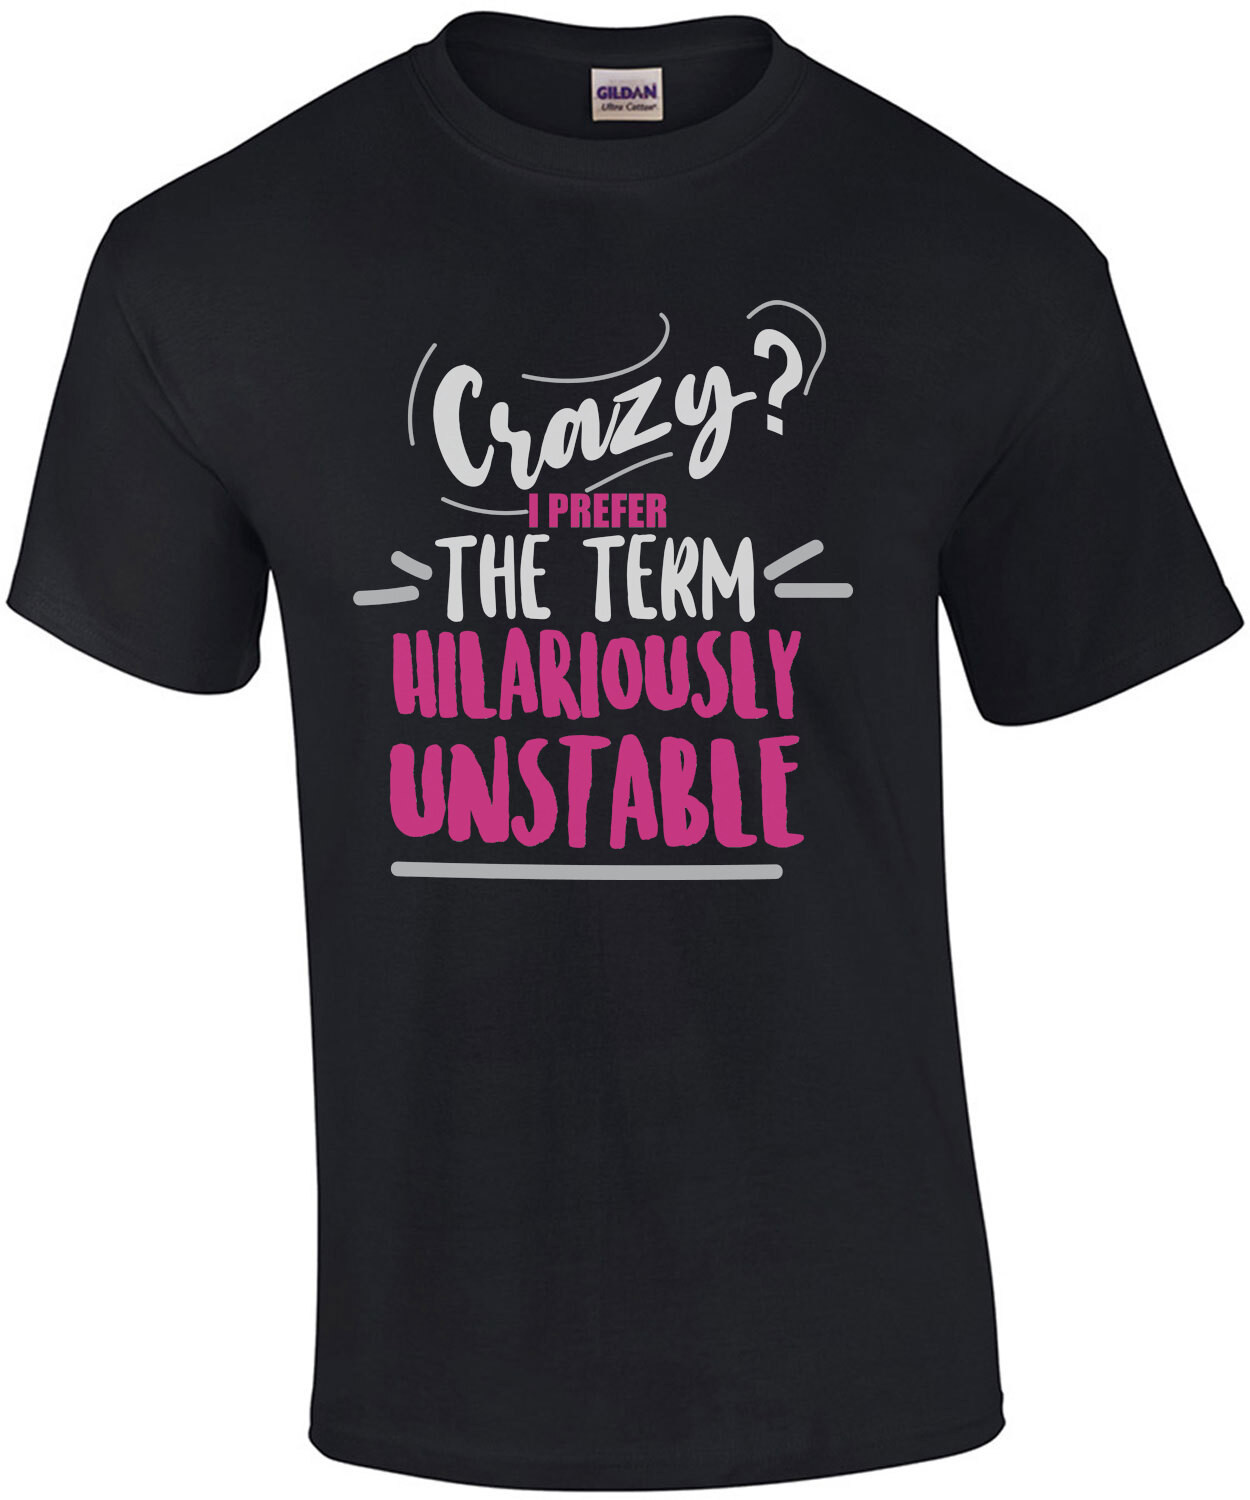 Crazy? I prefer the term hilariously unstable - funny t-shirt